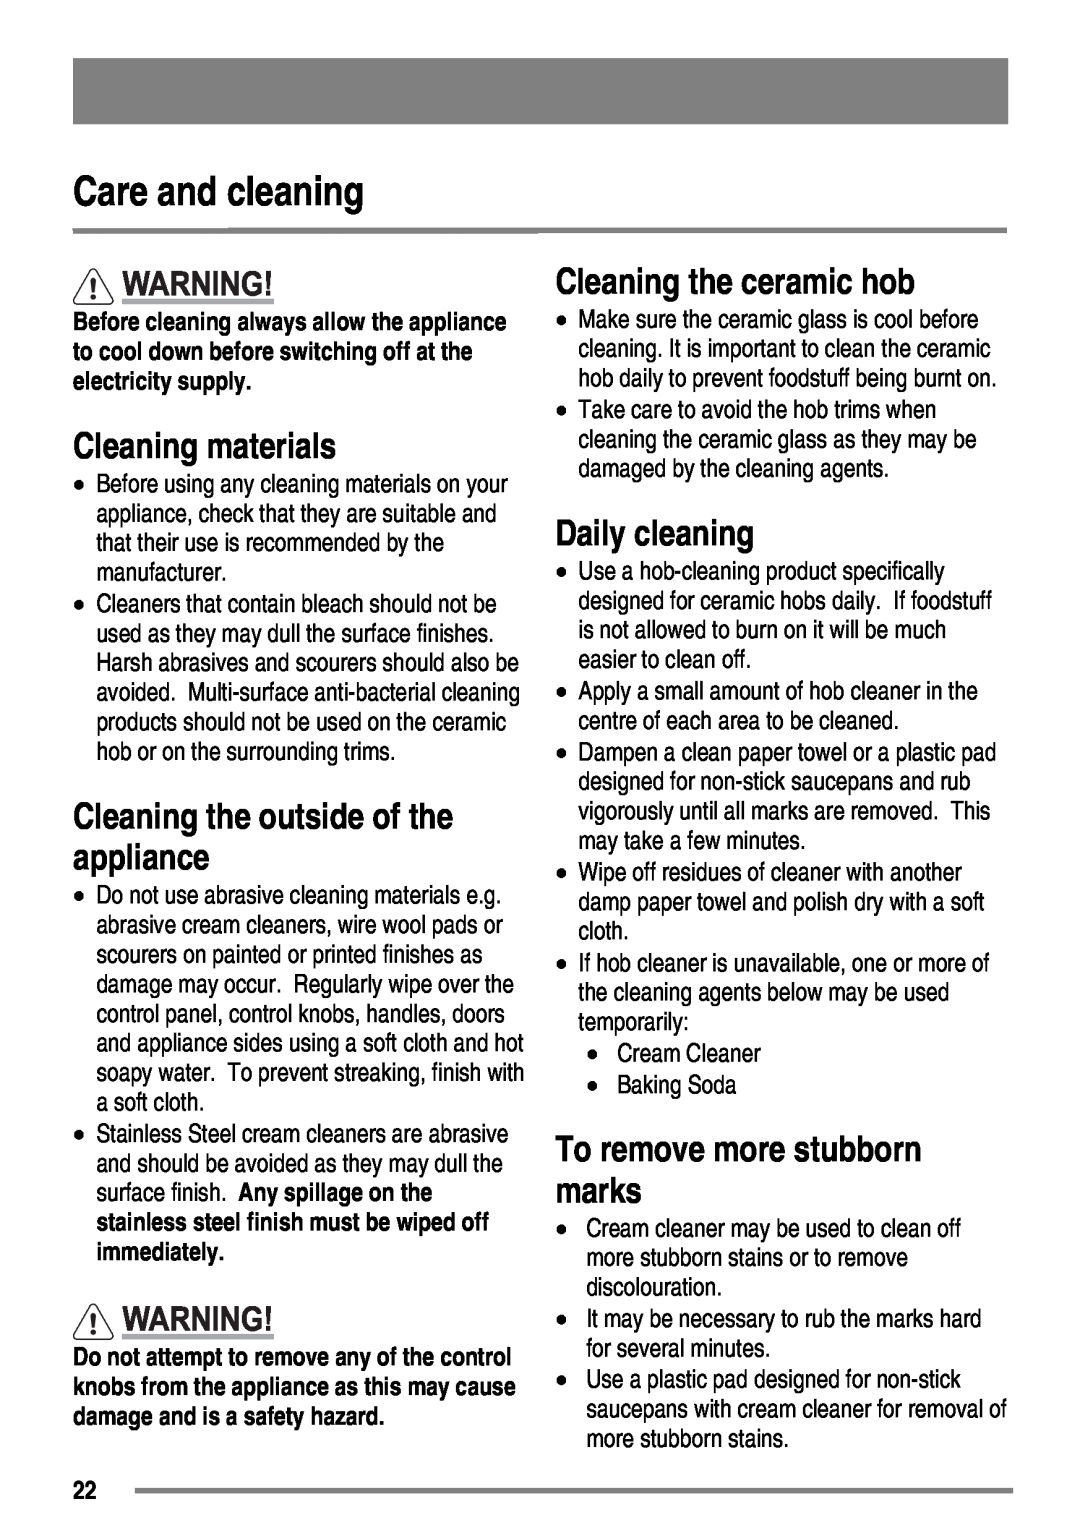 Zanussi ZKC6010 Care and cleaning, Cleaning materials, Cleaning the outside of the appliance, Cleaning the ceramic hob 